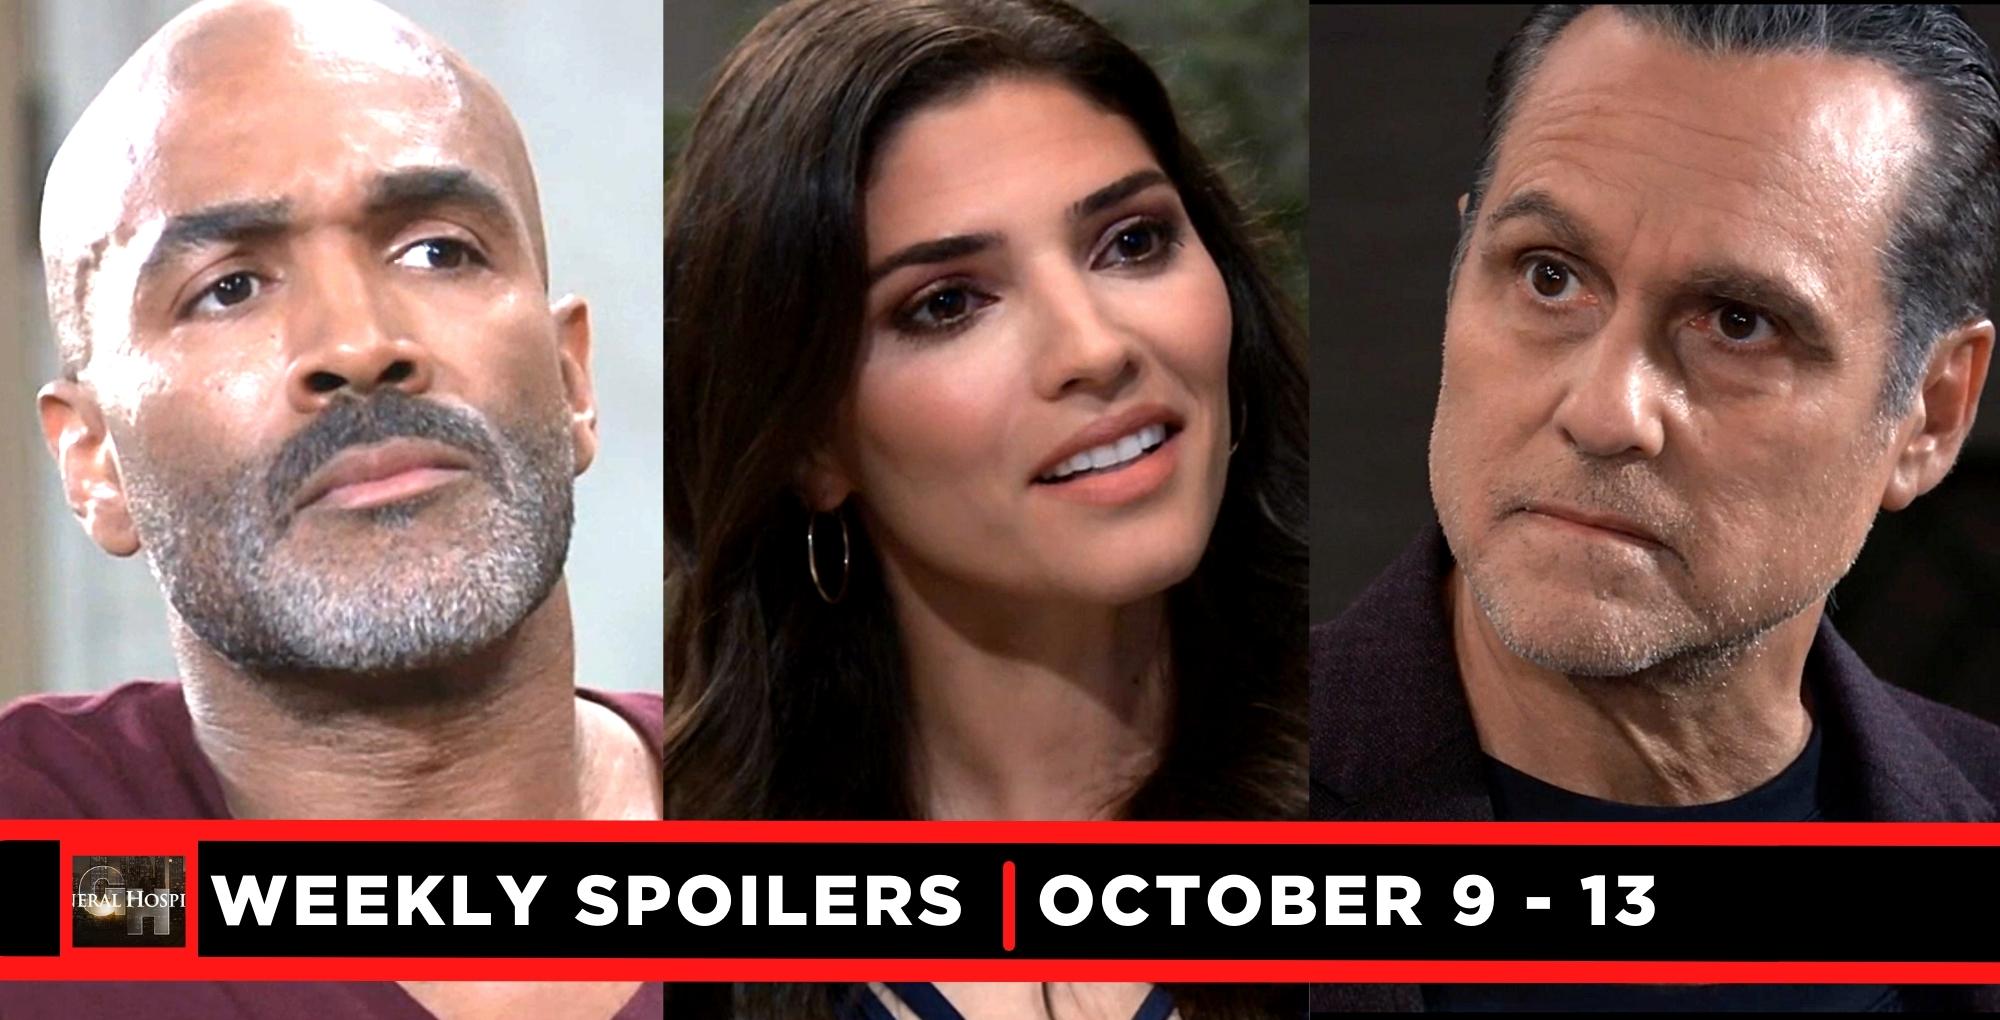 general hospital spoilers for october 9 – october 13, 2023, three images, curtis, brook lynn, and sonny.